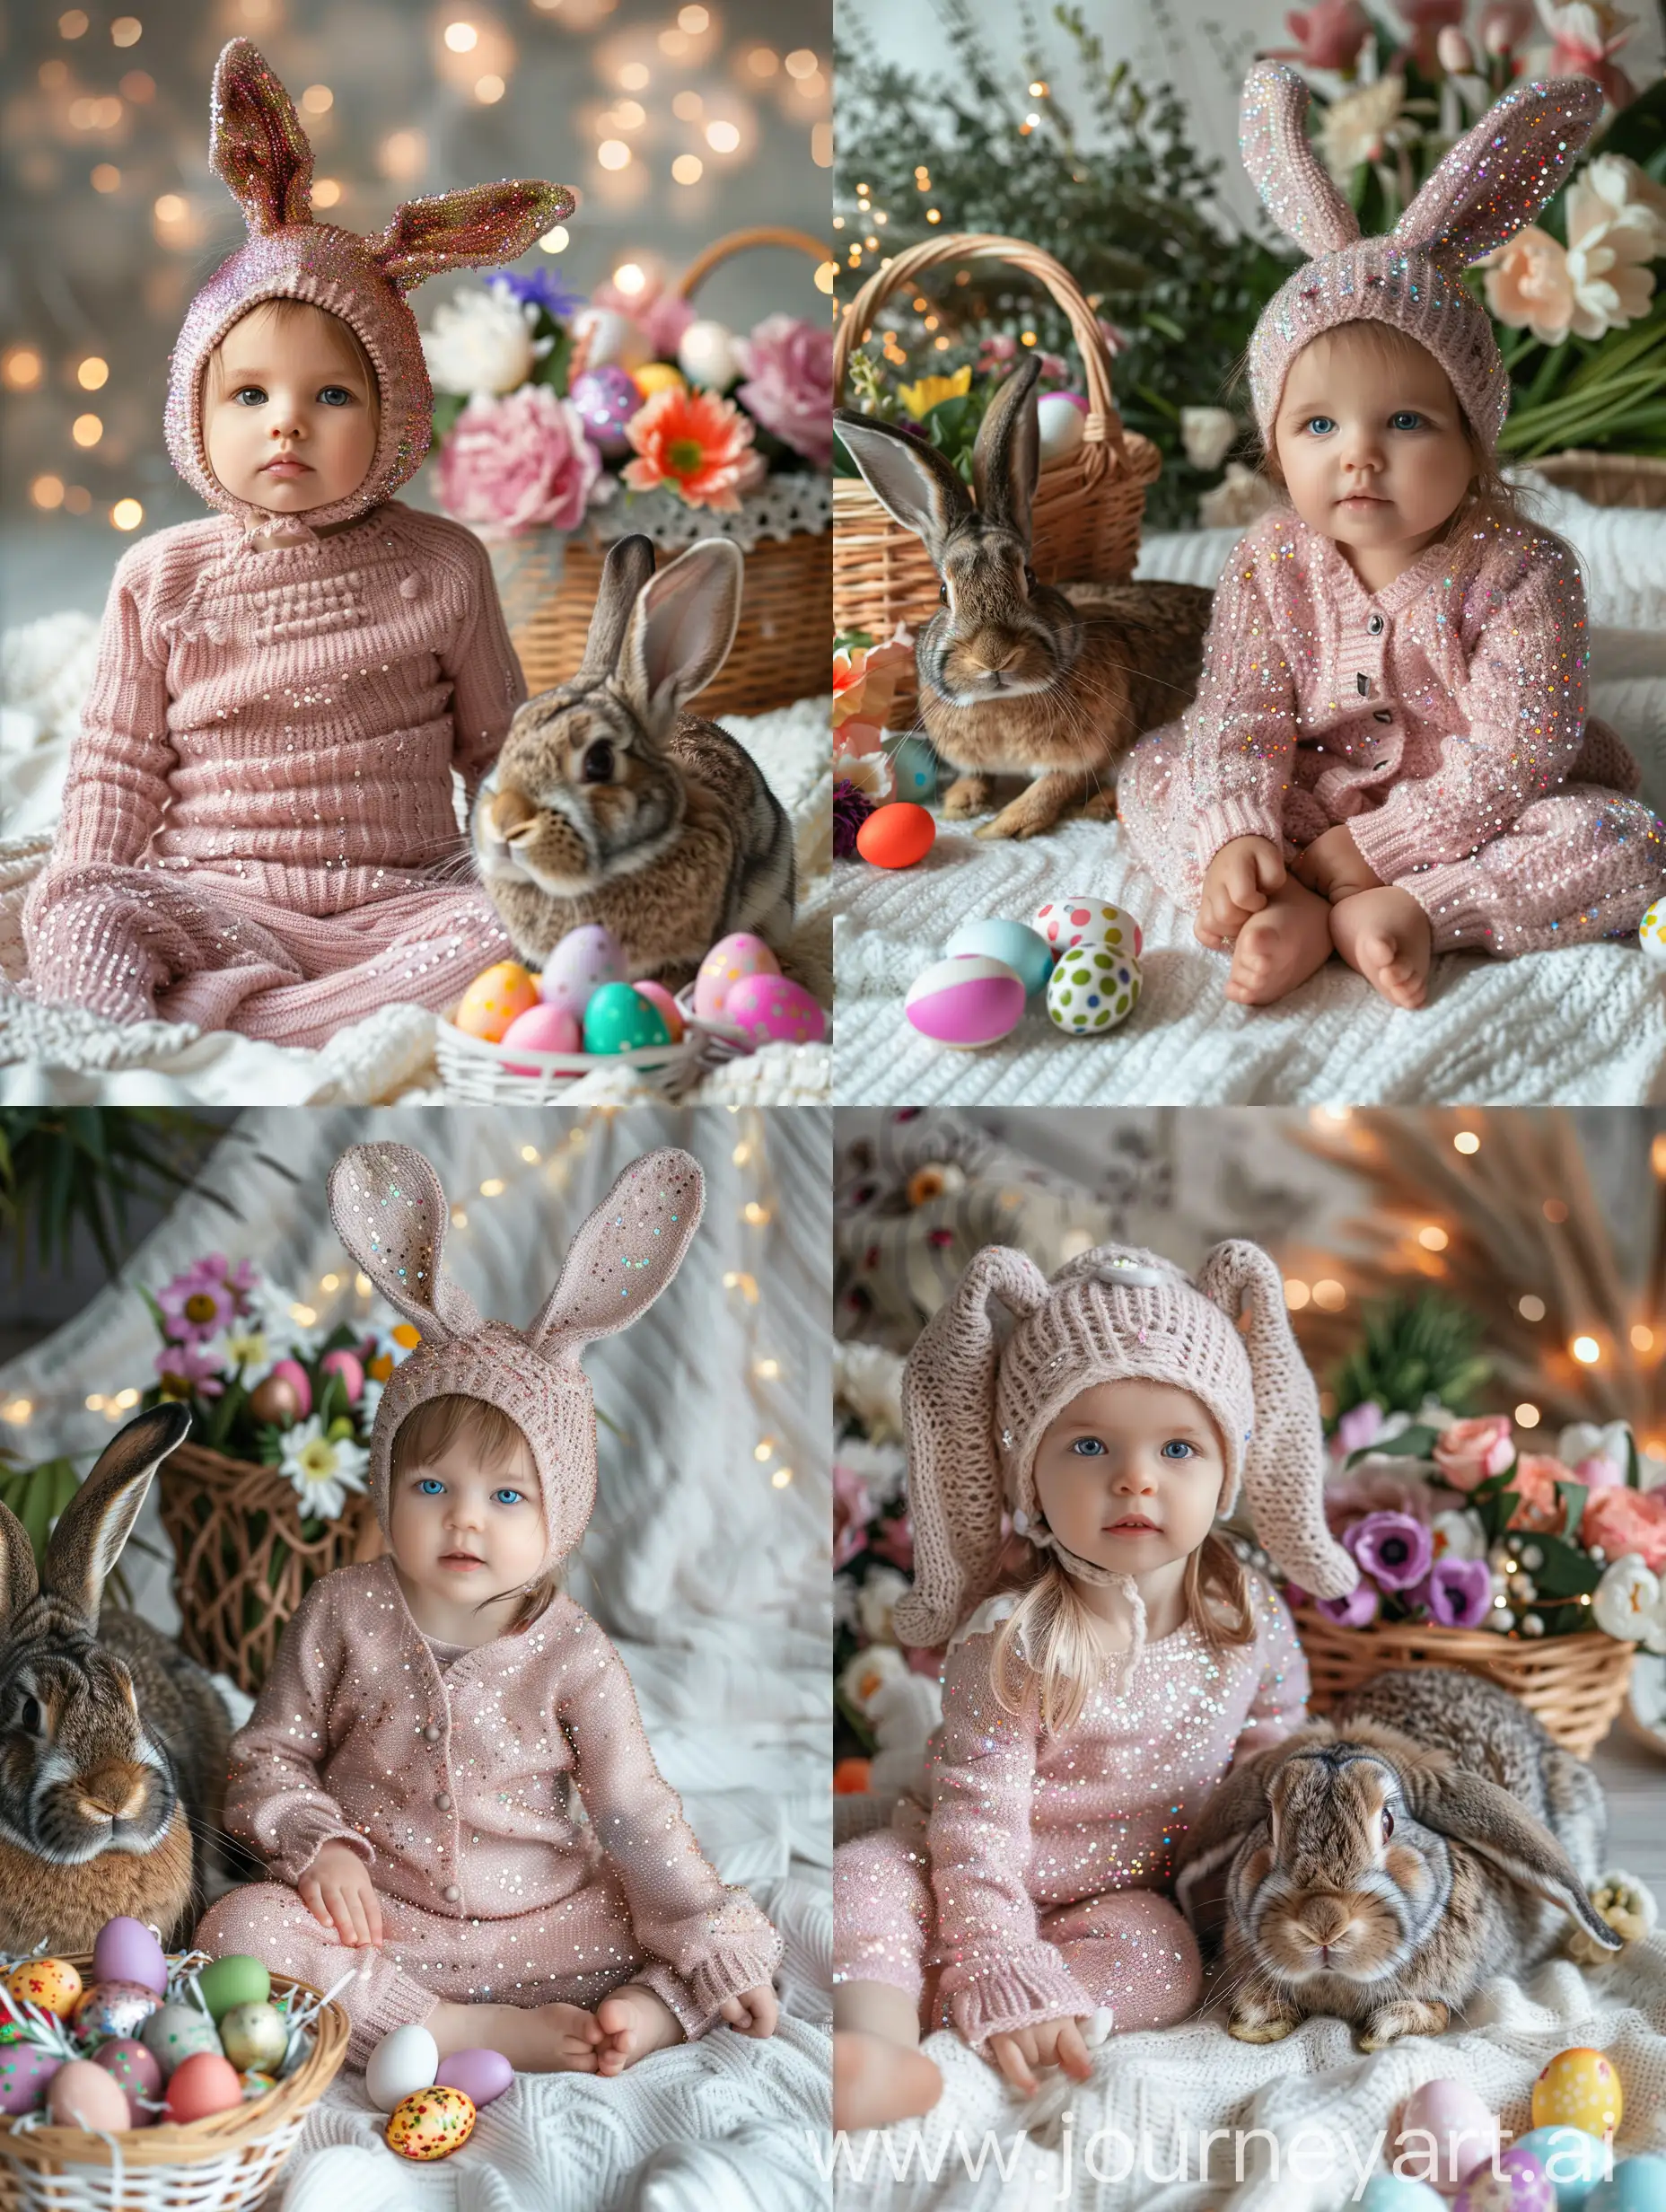 Plrtretret Little child in a knitted pink costume with sequins, in a hat with knitted hare ears sits on a white blanket, next to sits a live rabbit, the face is clearly visible, looking directly into the camera, next to lie colorful Easter eggs, a basket of flowers, detail, hyperrealism close-up, colors are delicate, aesthetics, lights